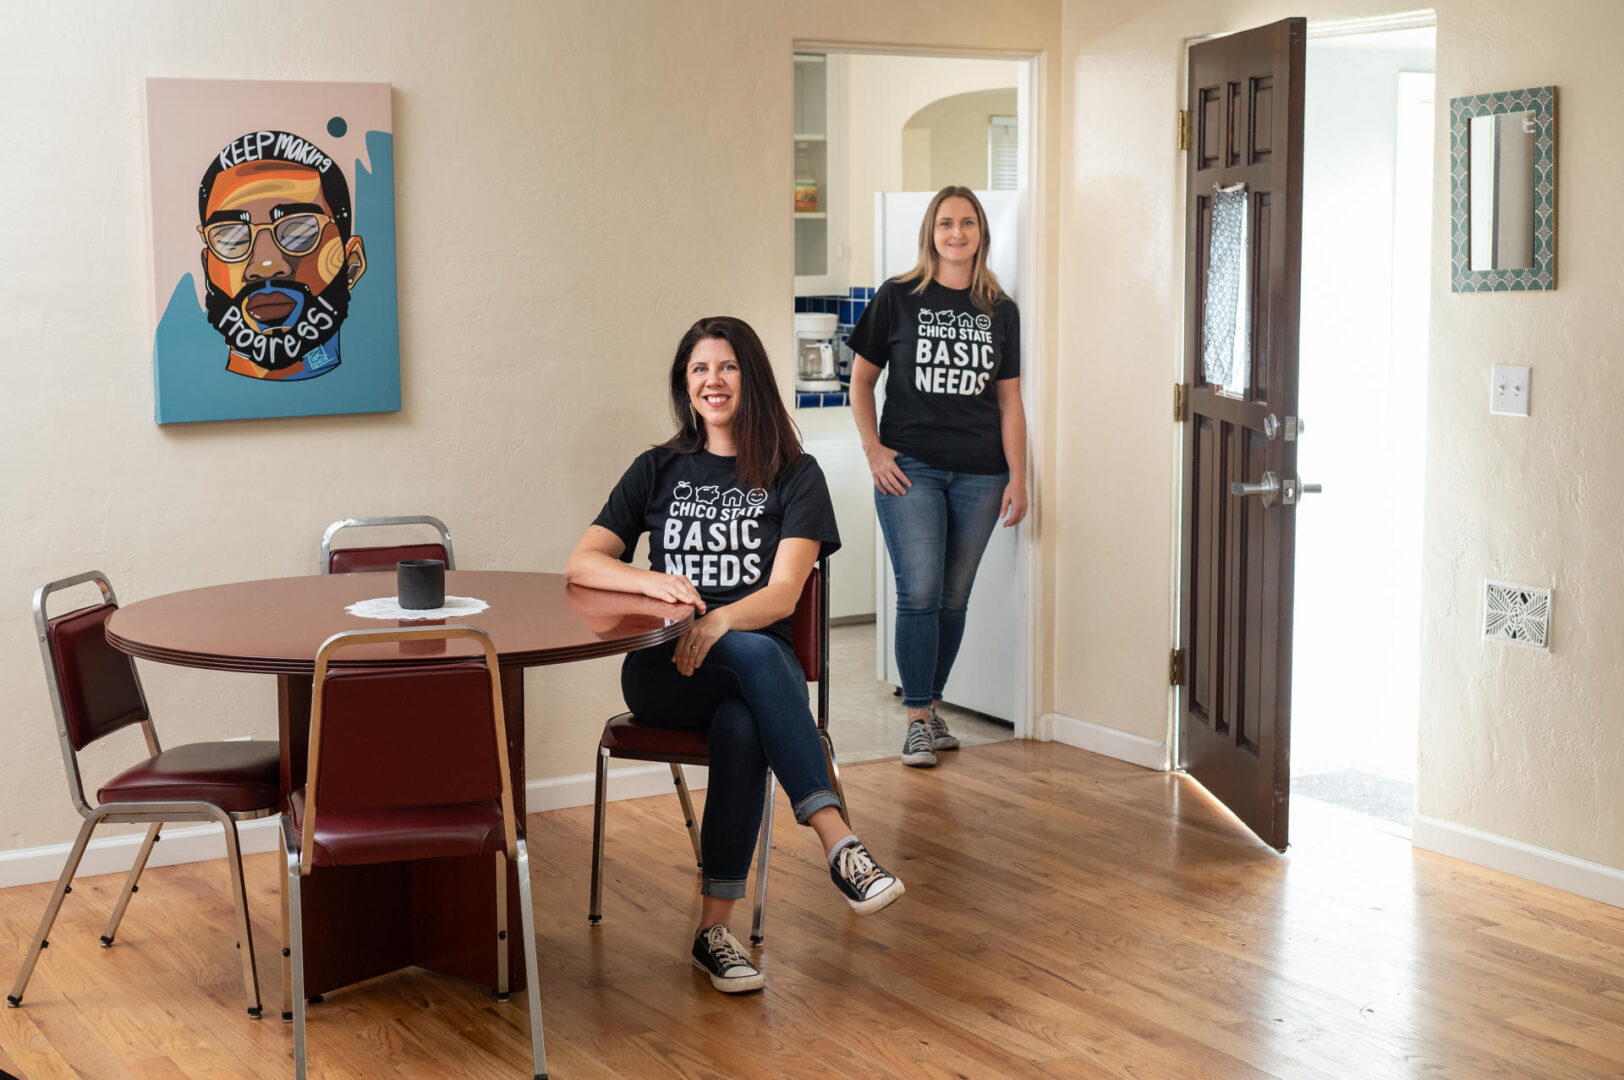 Dawn Carini sits in a chair at a table and Emma Jewett stands in a doorway, both smiling as they pose next to an open front door.